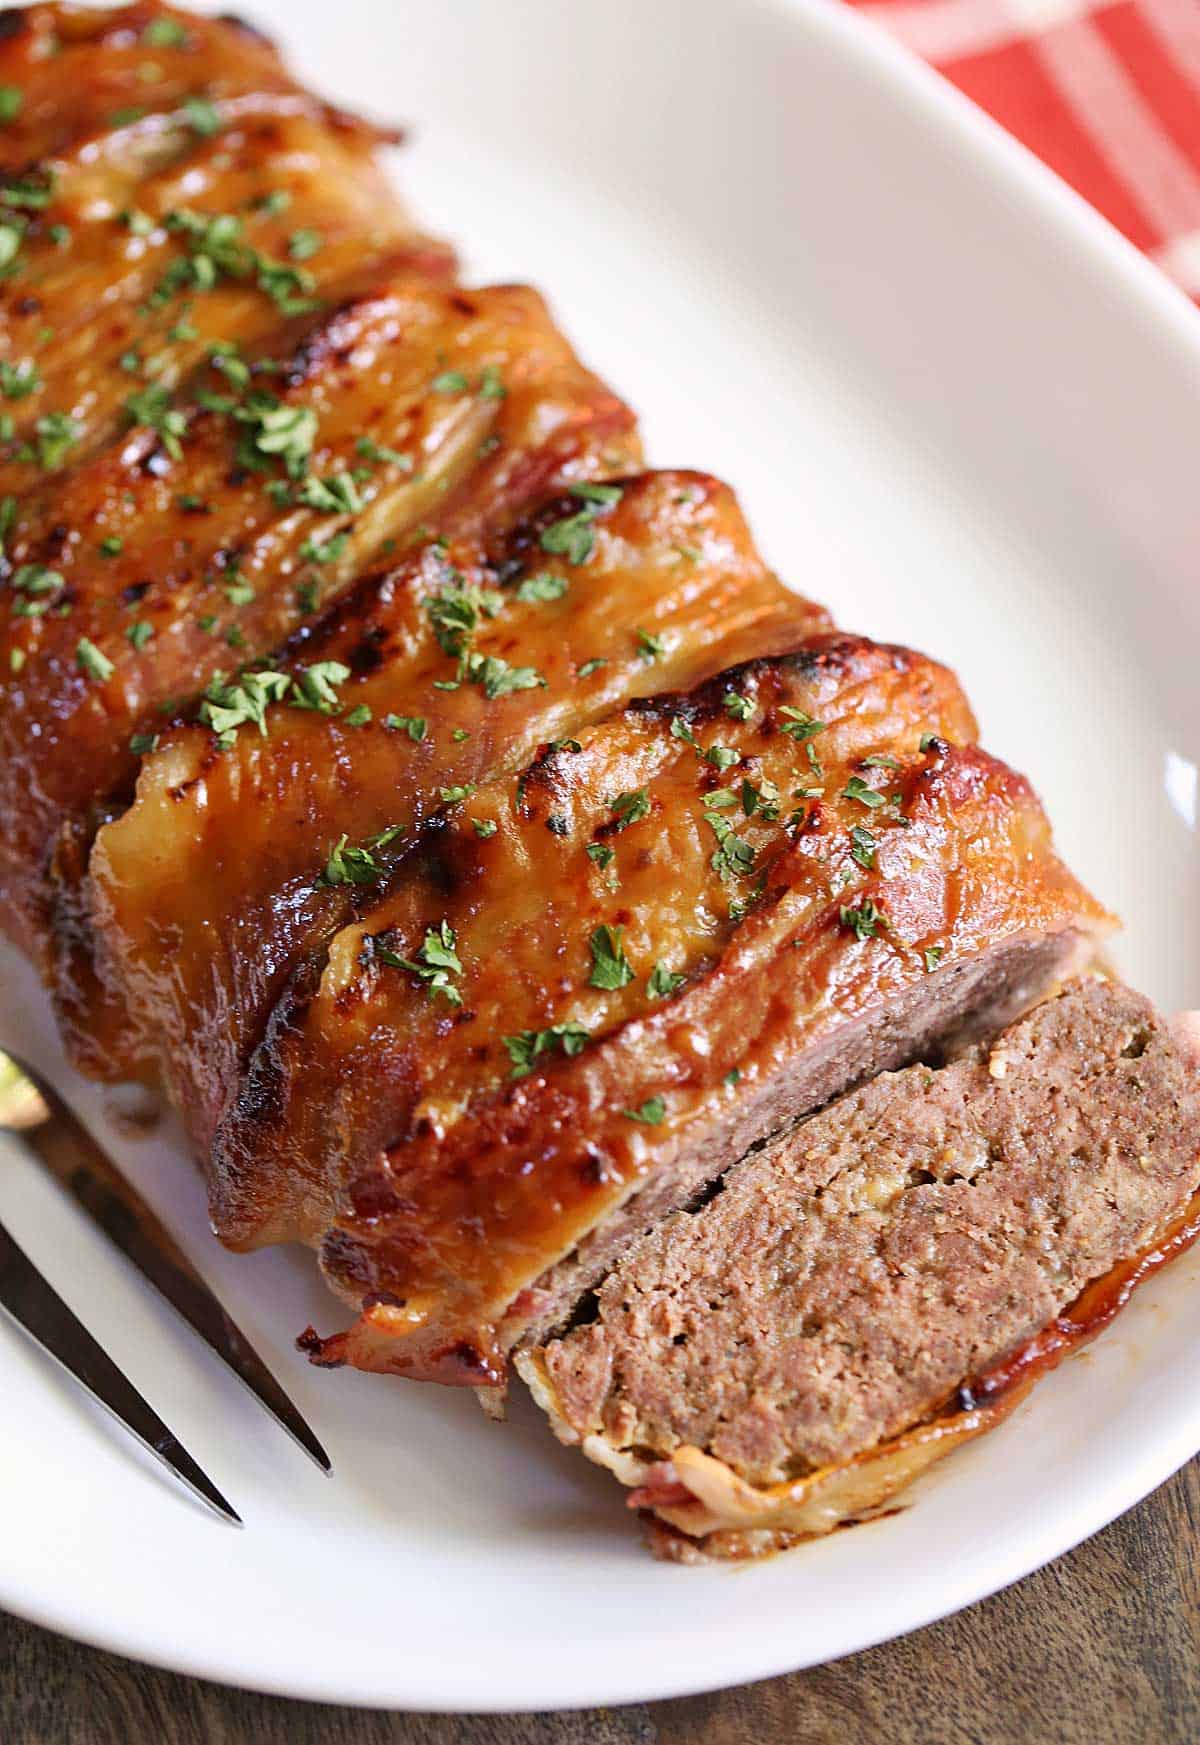 Bacon-wrapped meatloaf is served on a white platter with a serving fork.